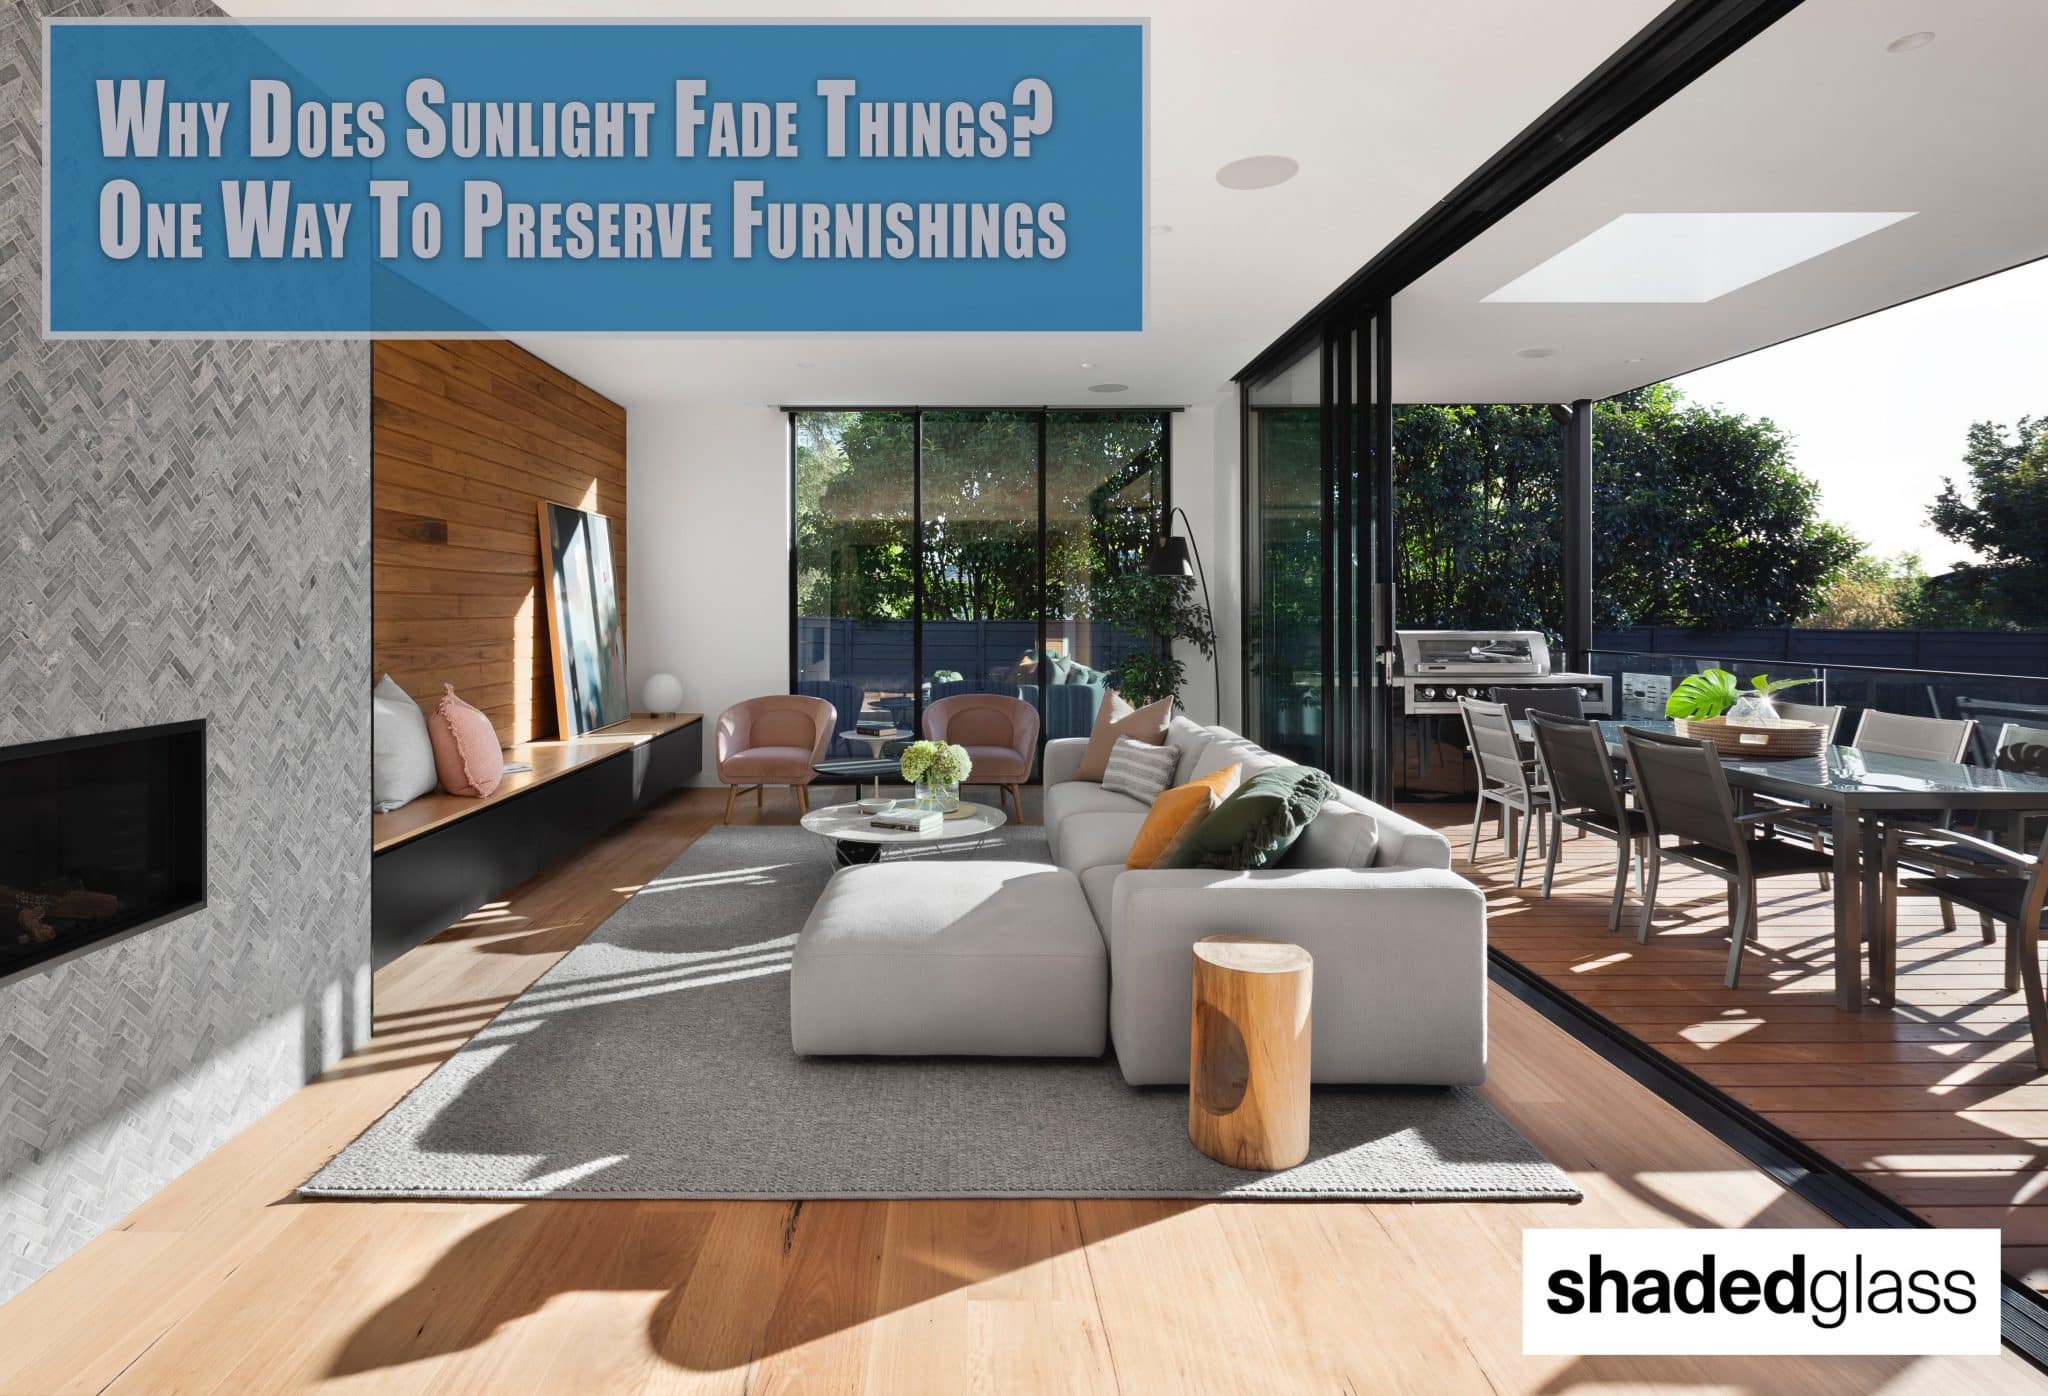 Why Does Sunlight Fade Things? 1 Way To Preserve Furnishings. - Home Window tint and Film Services in Ogden, UT